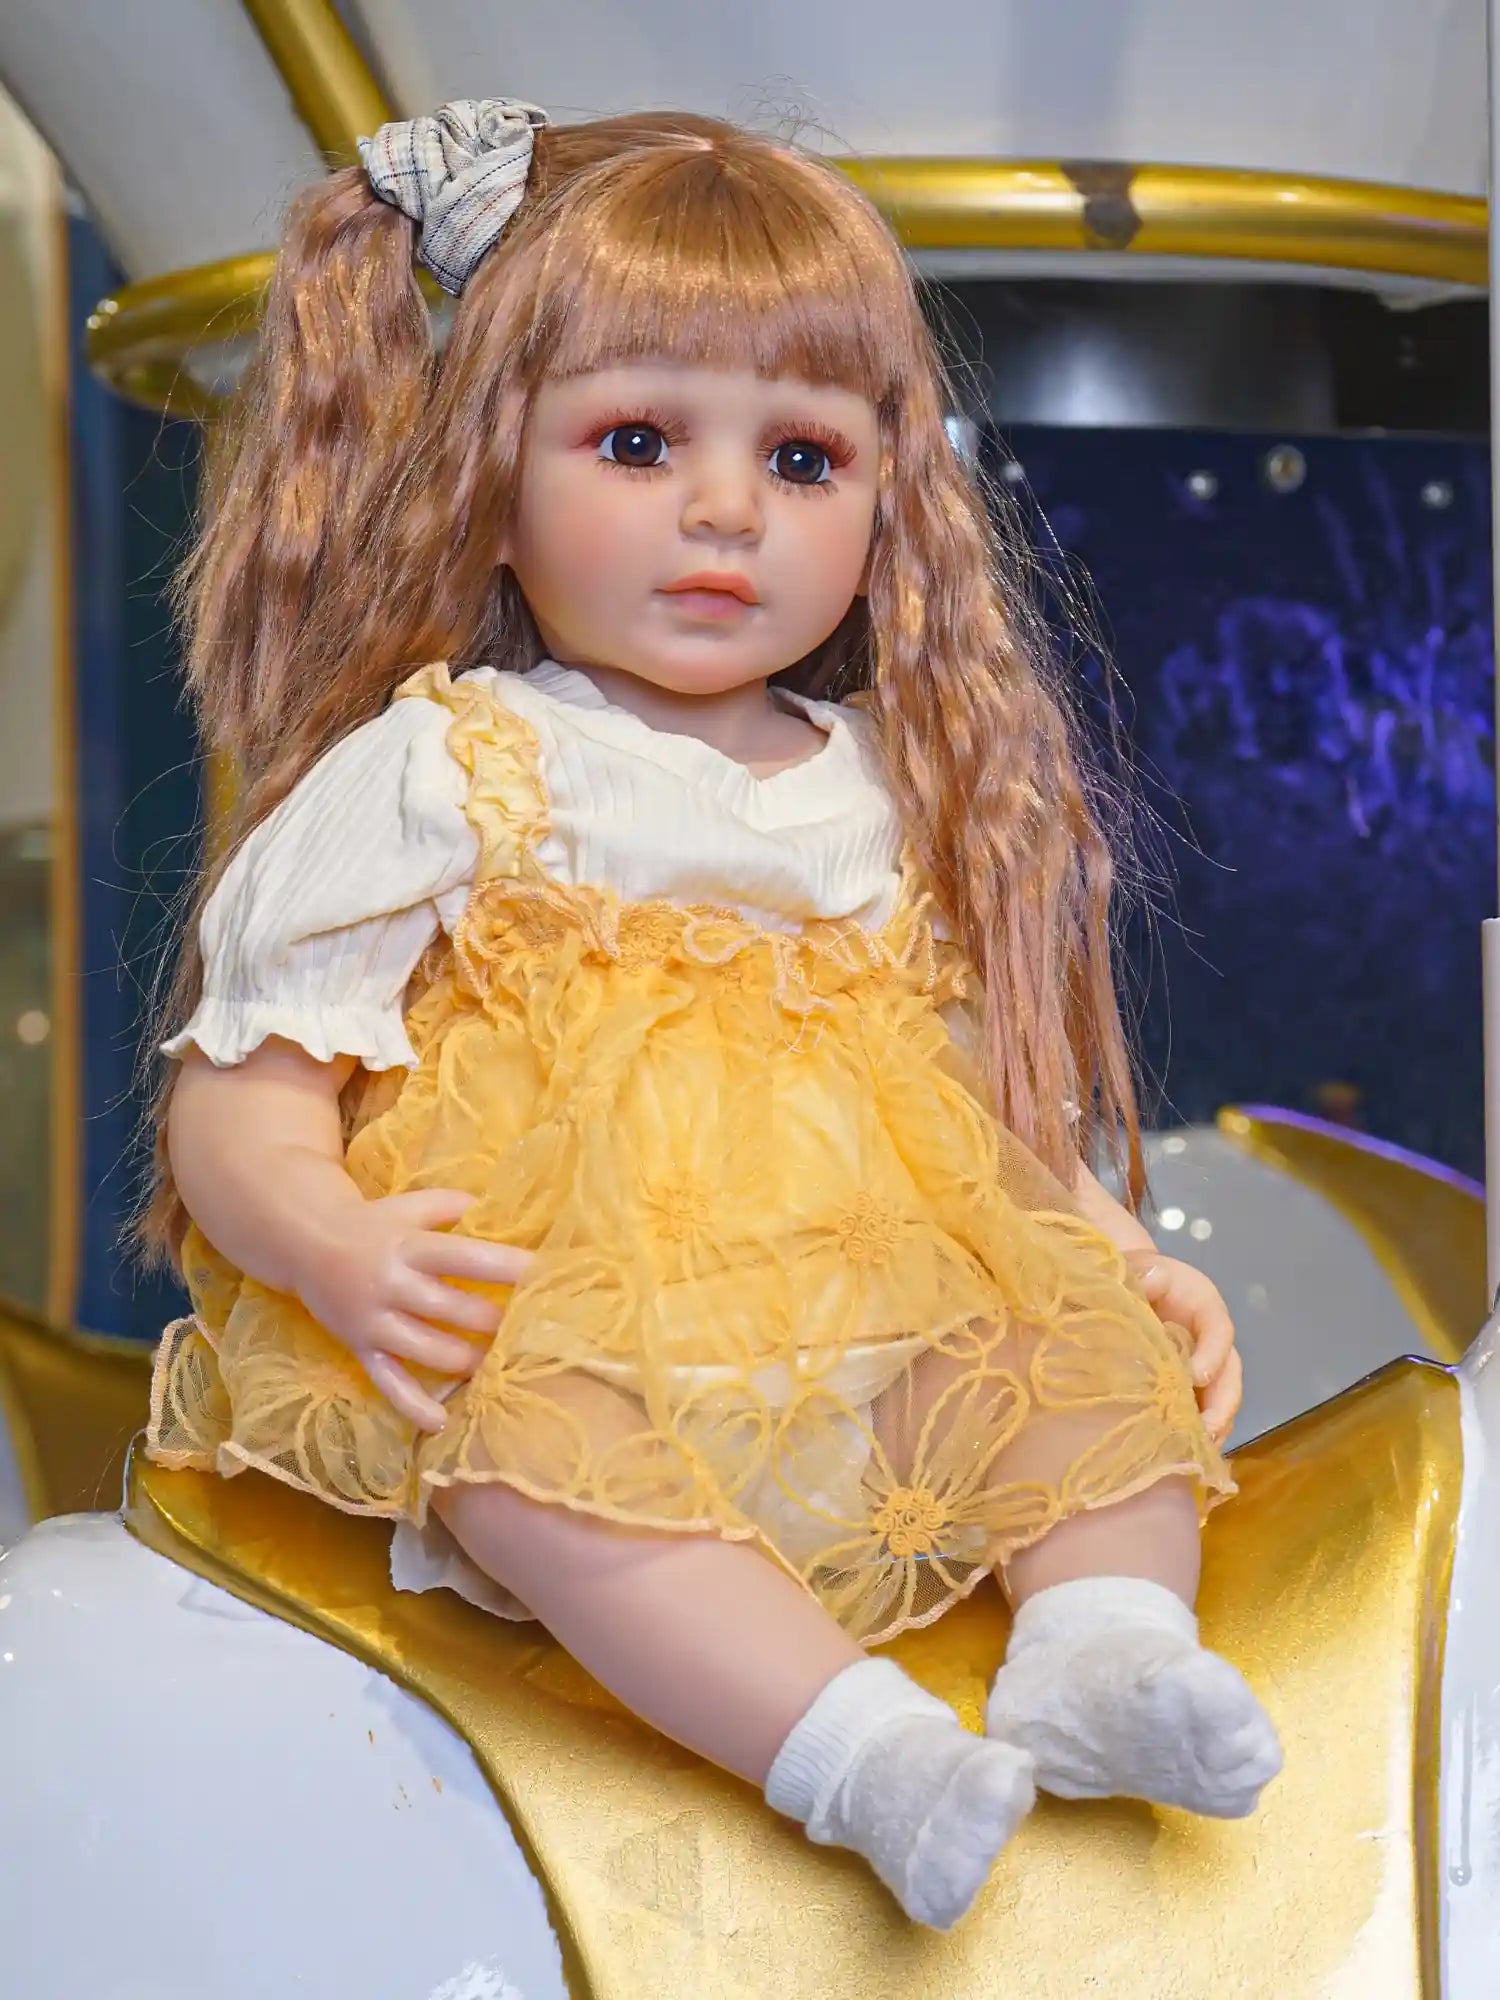 A doll that radiates playfulness, dressed in a joyful yellow outfit, with her hair sweetly tied up, ready for a day of fun.